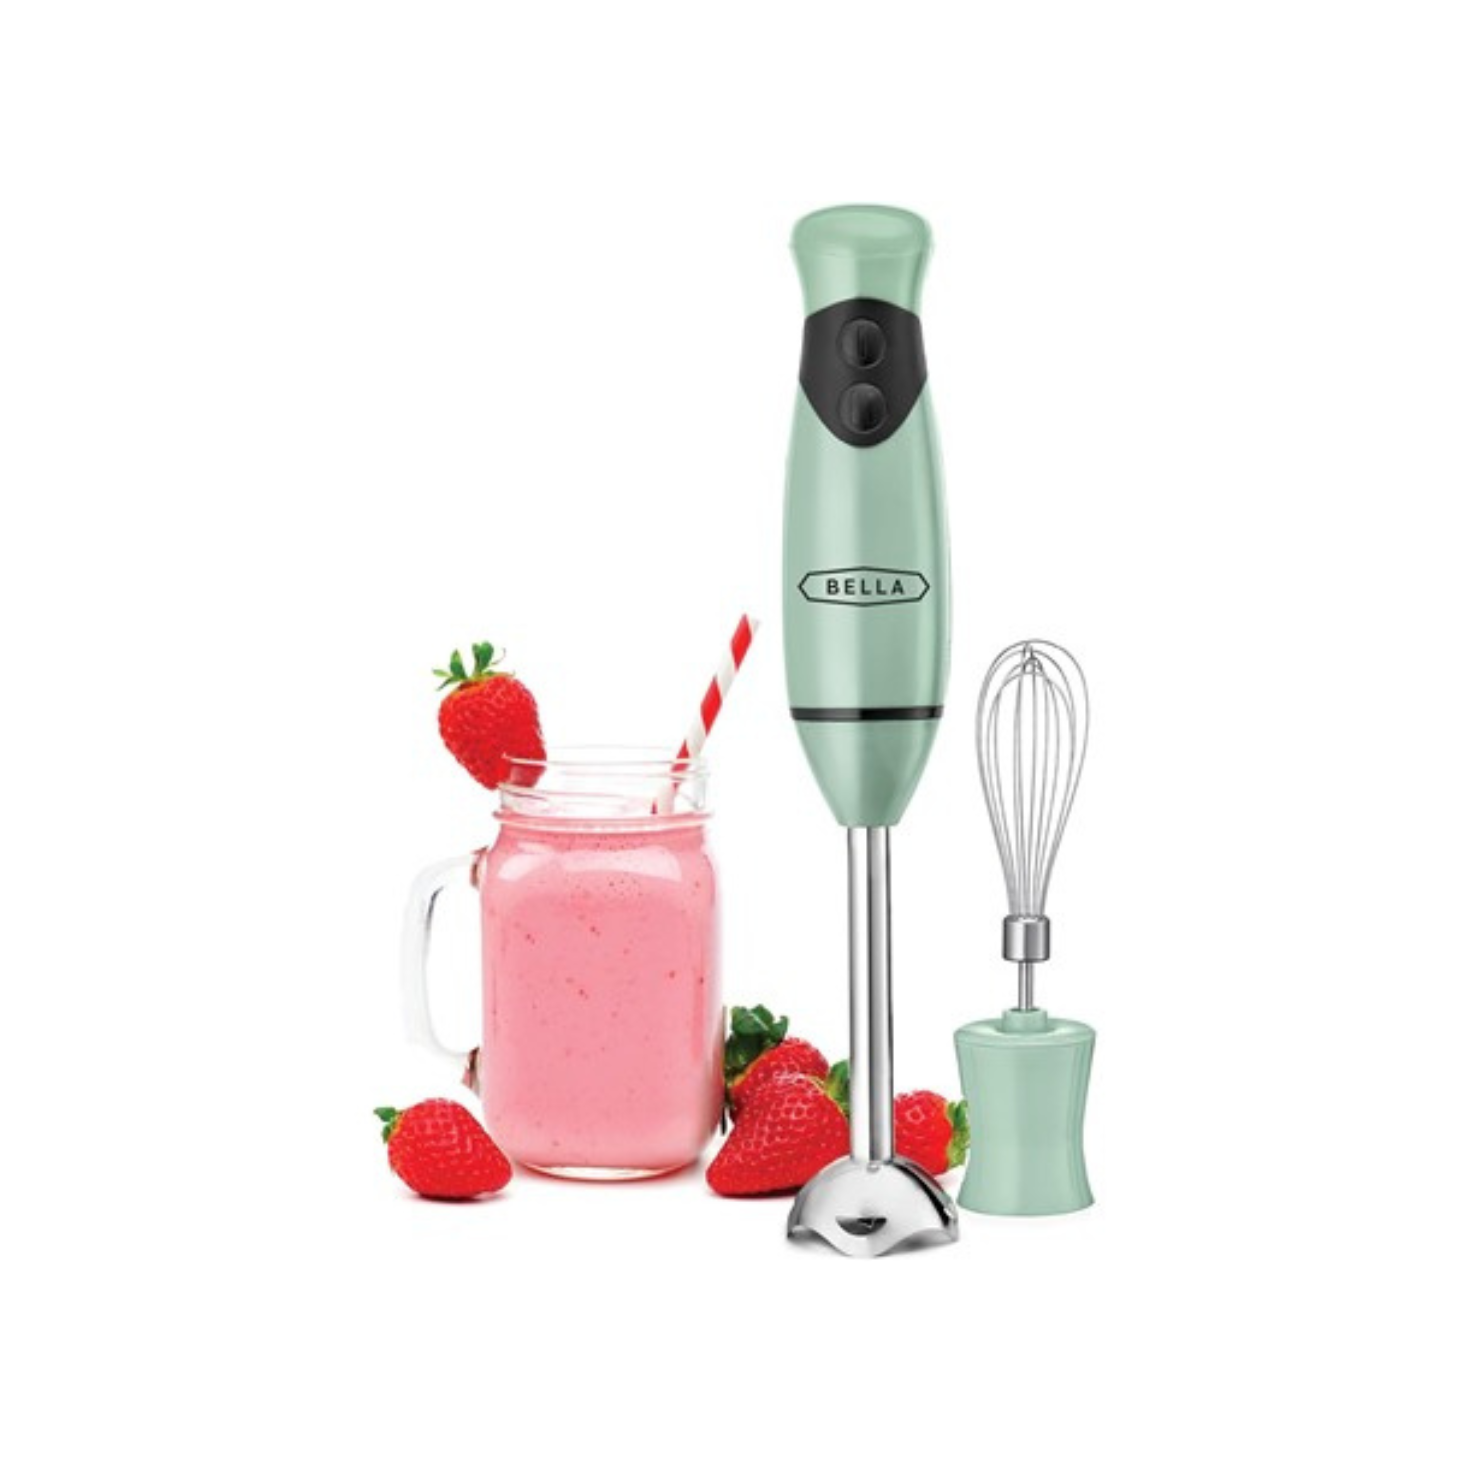 BELLA Portable Immersion Blender with Whisk Attachment